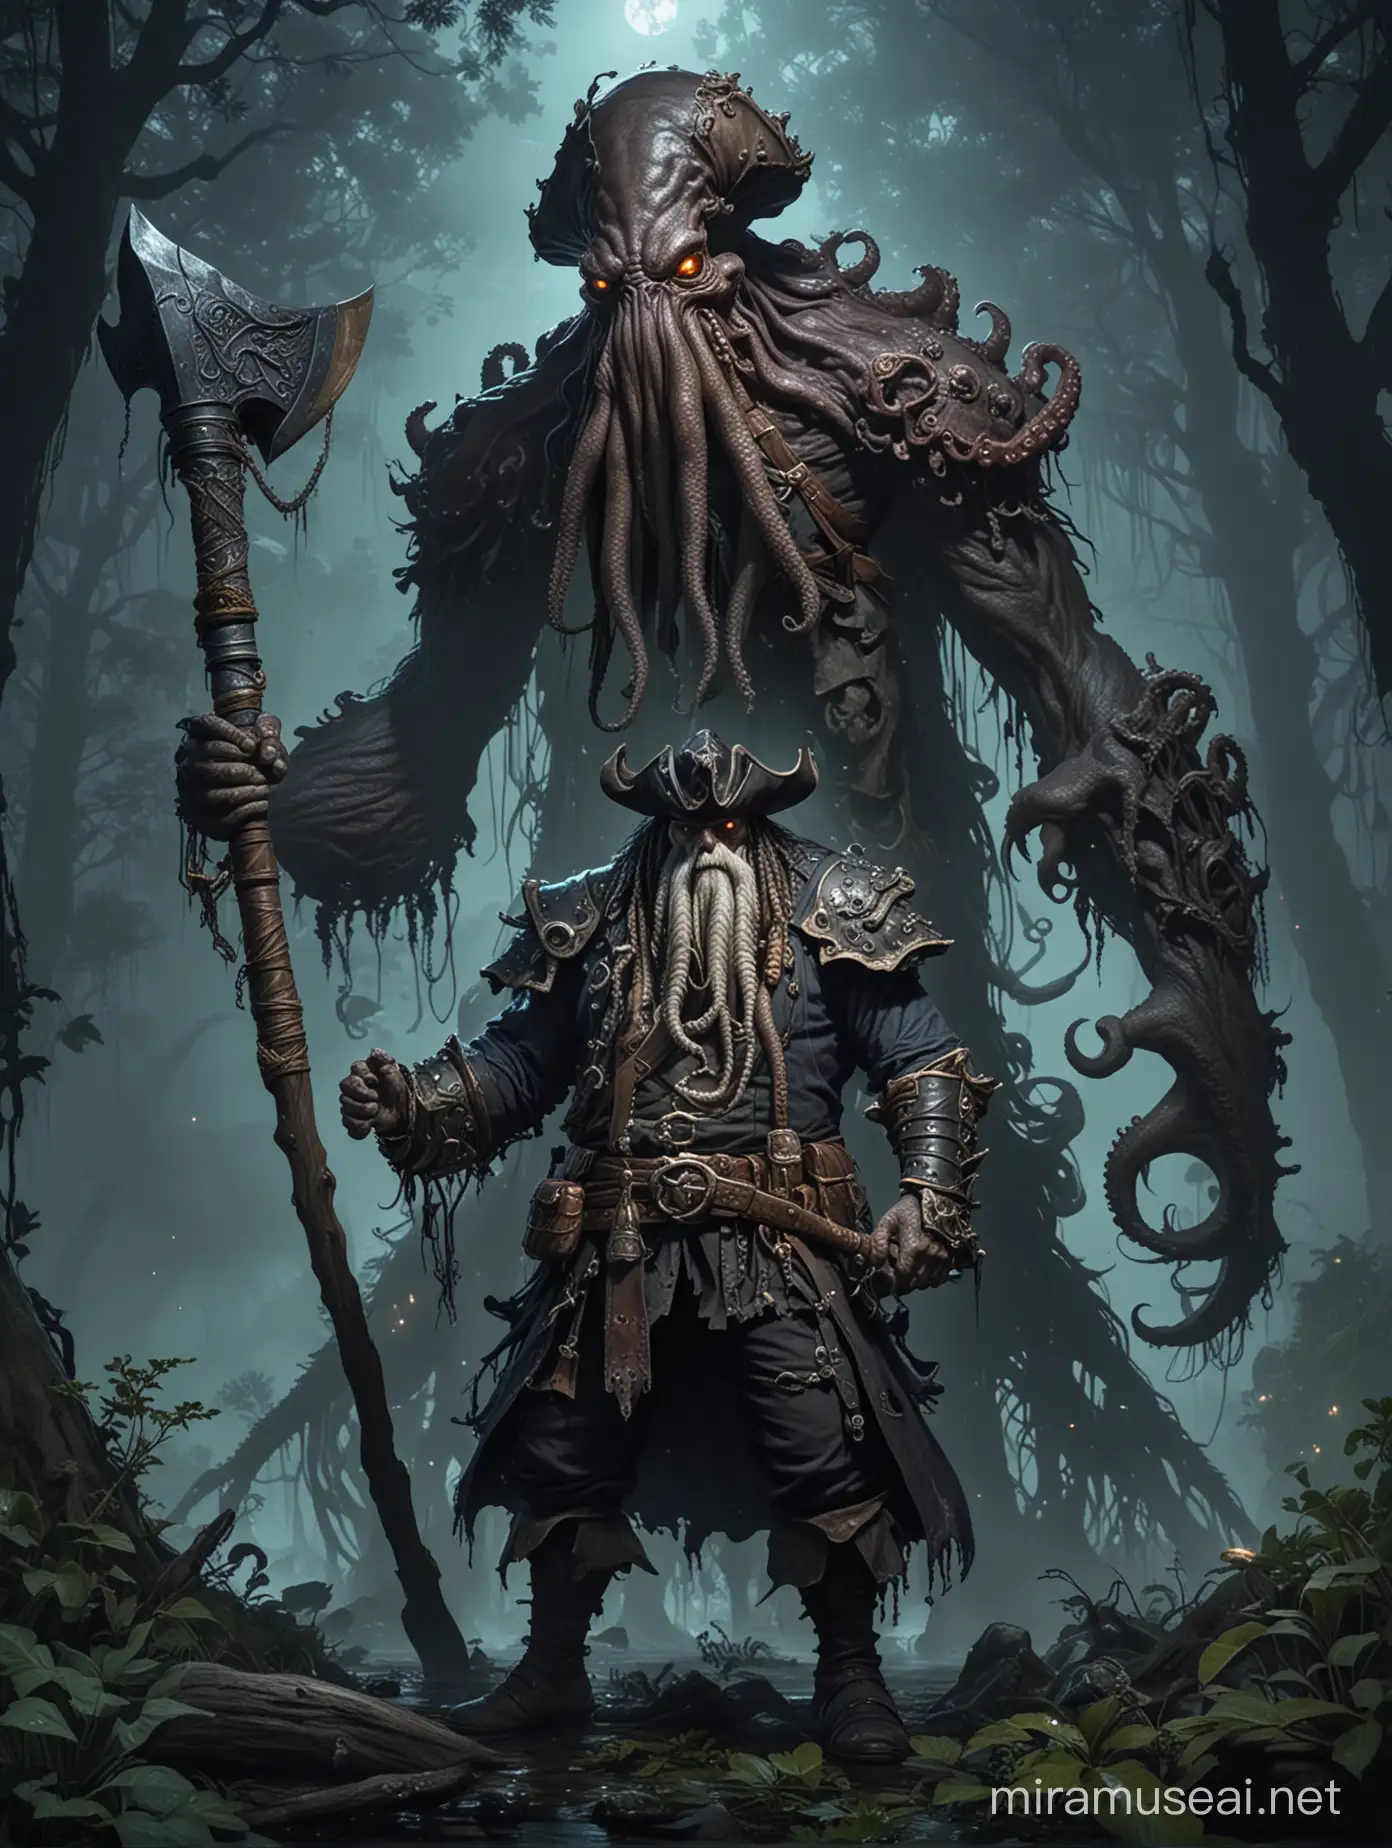 A gigantic monster with the corpse of a man and the head of an octopus. He's wearing pirate clothes. He's armed with an enormous axe. The setting is a dark swamp during the night.